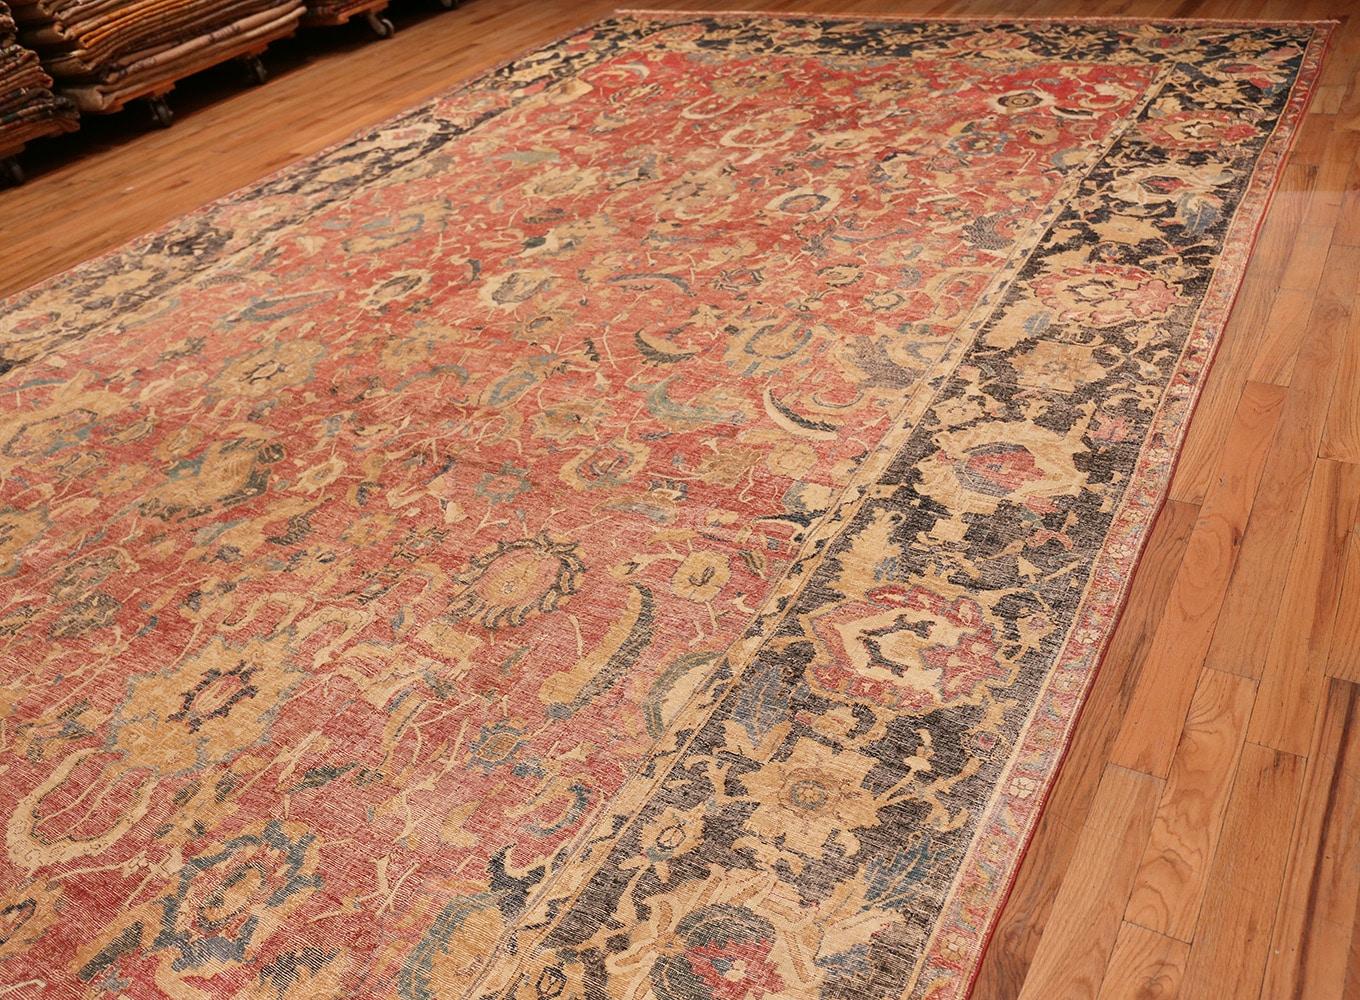 17th Century Persian Esfahan Rug. Size: 11 ft 4 in x 30 ft For Sale 3